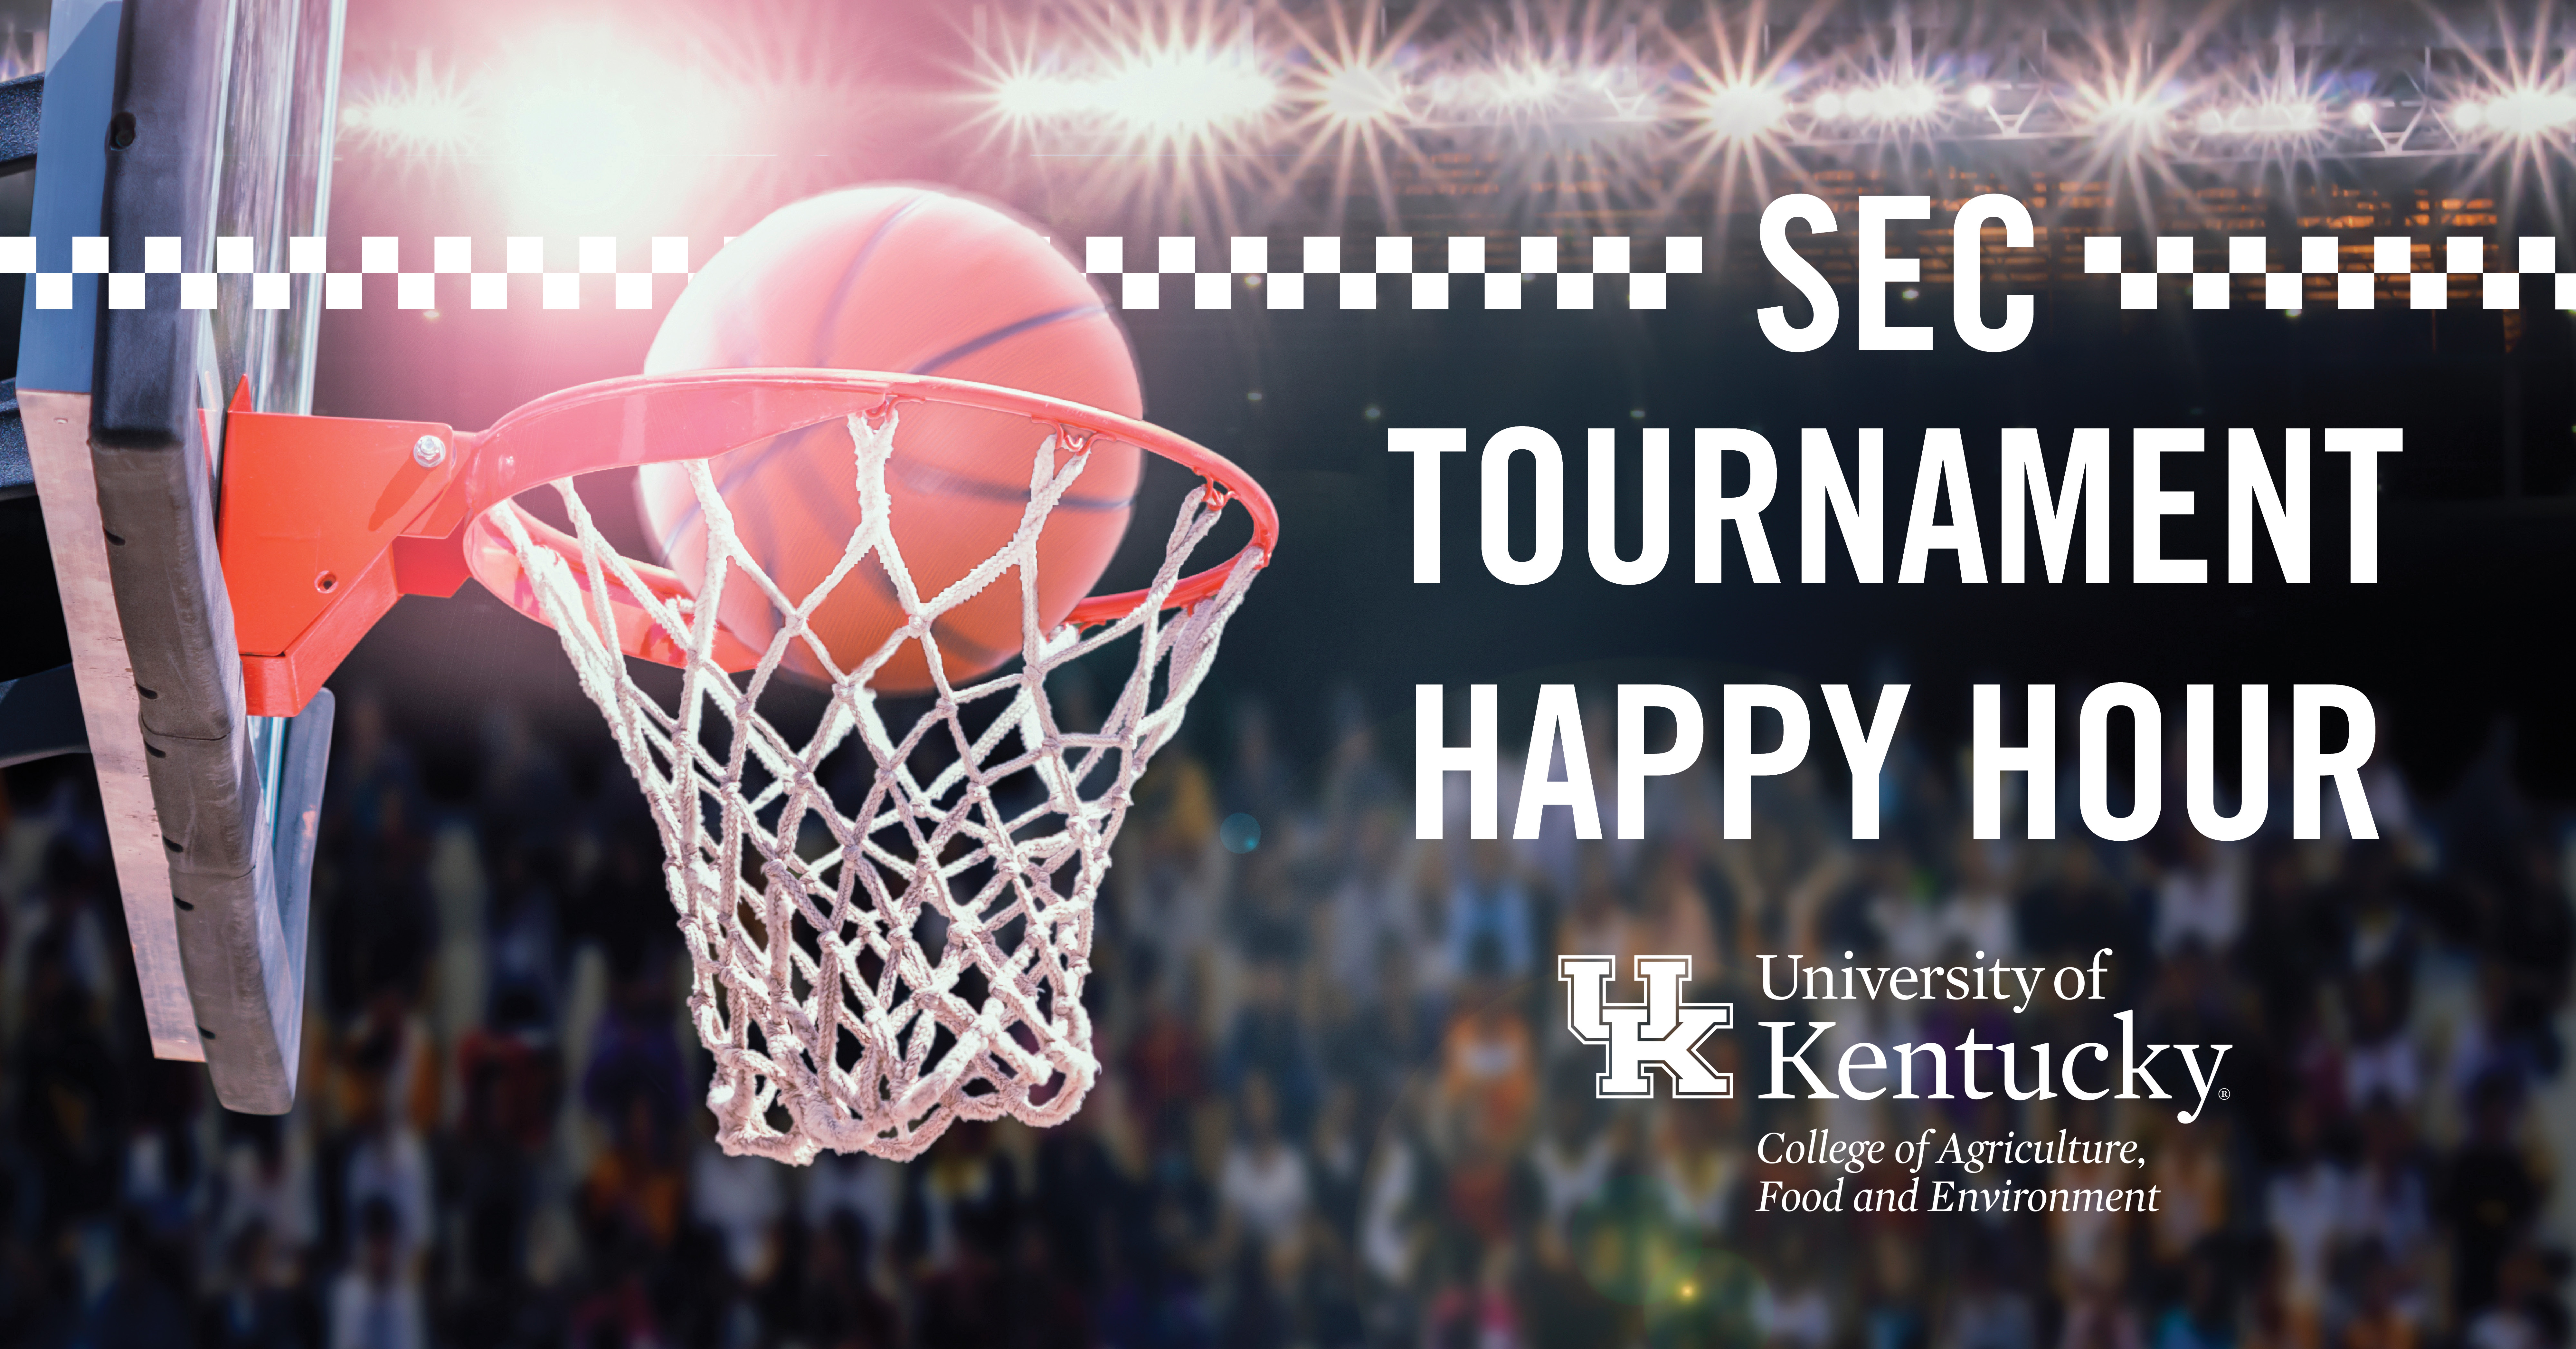 SEC Tournament Happy Hour University of Kentucky College of Agriculture, Food and Environment